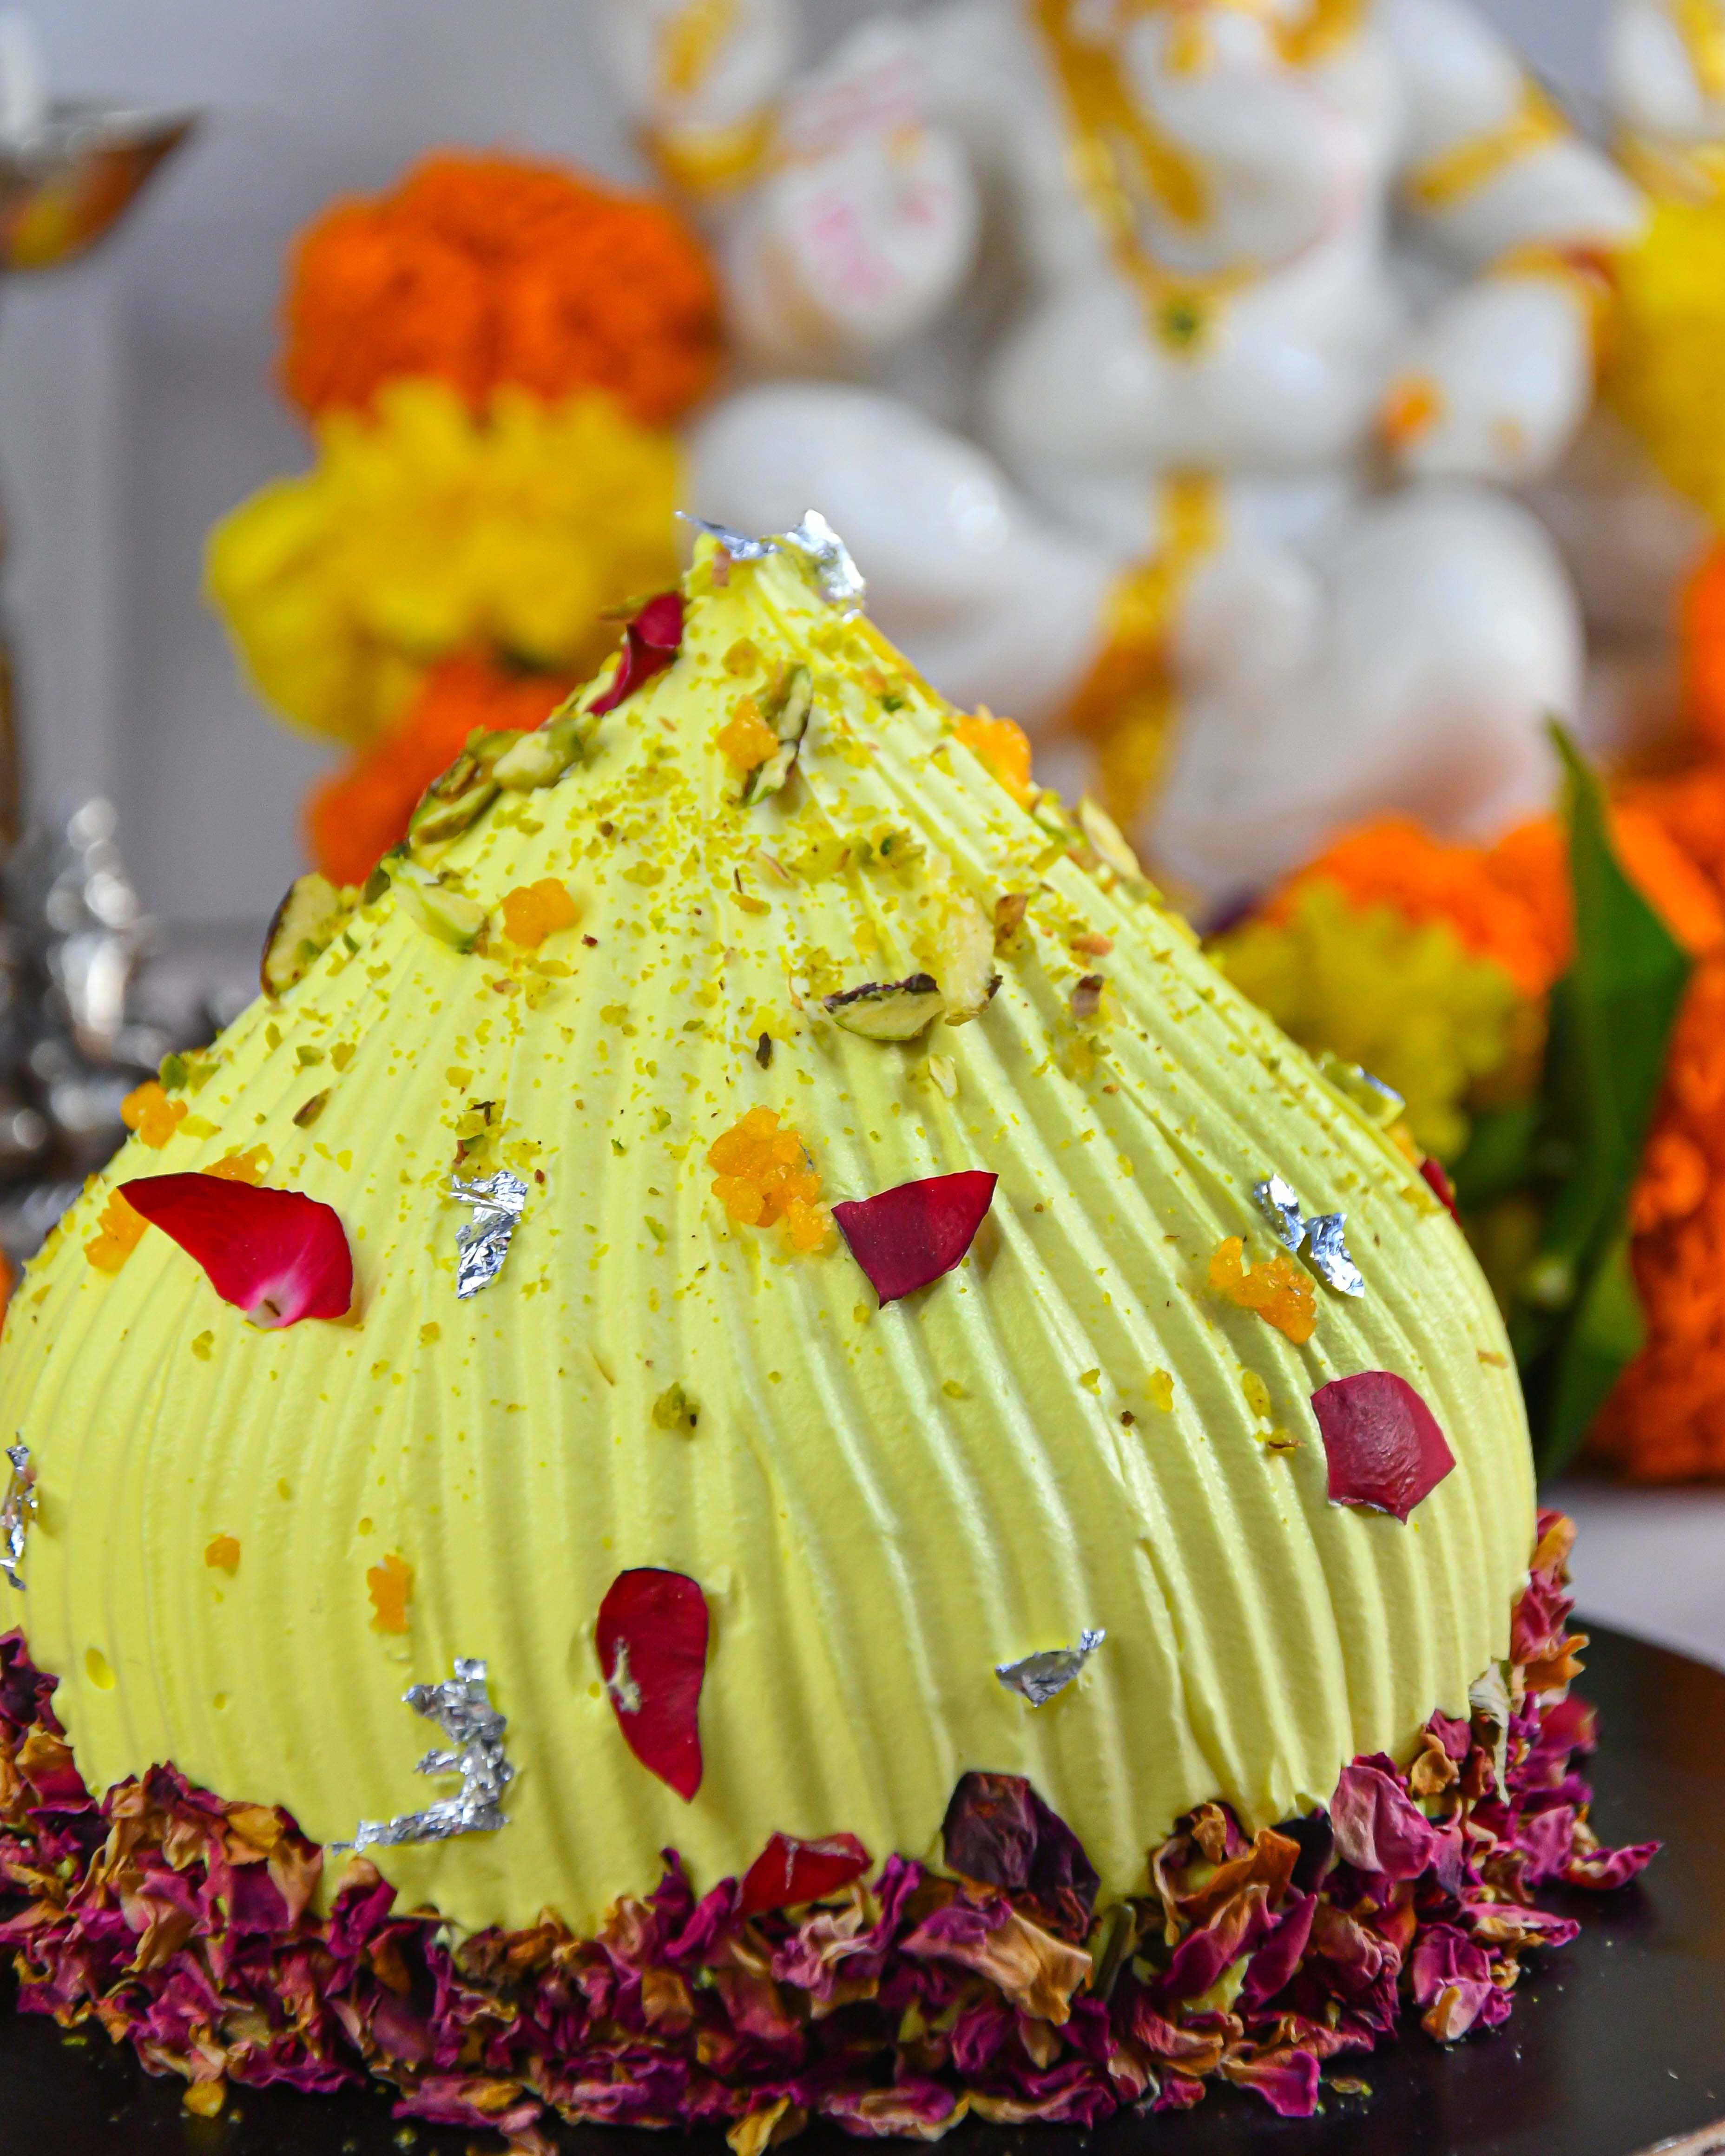 Buy 2 Tier Cake for Ganesh Chaturthi | Delivery in Gurgaon by Bakehoney